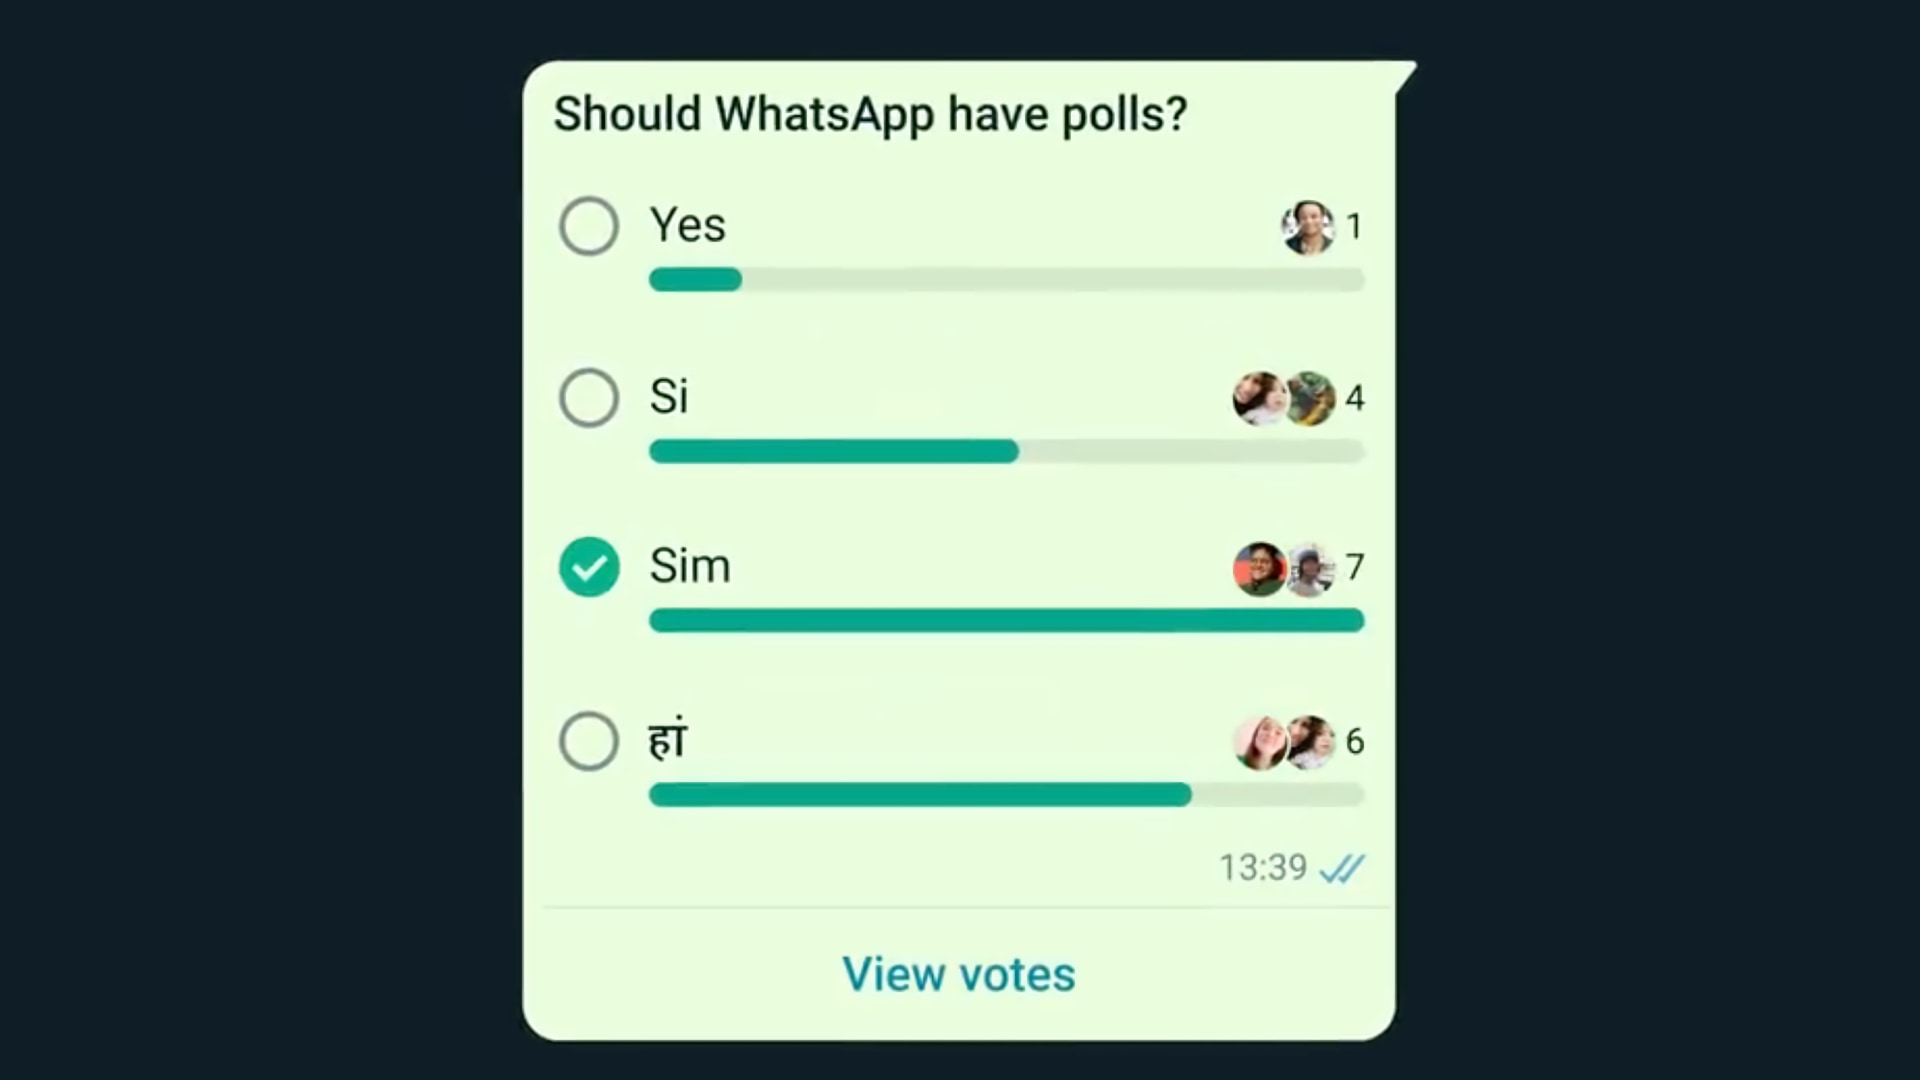 A WhatsApp poll asking people whether WhatsApp should have polls, with four positive answers in different languages